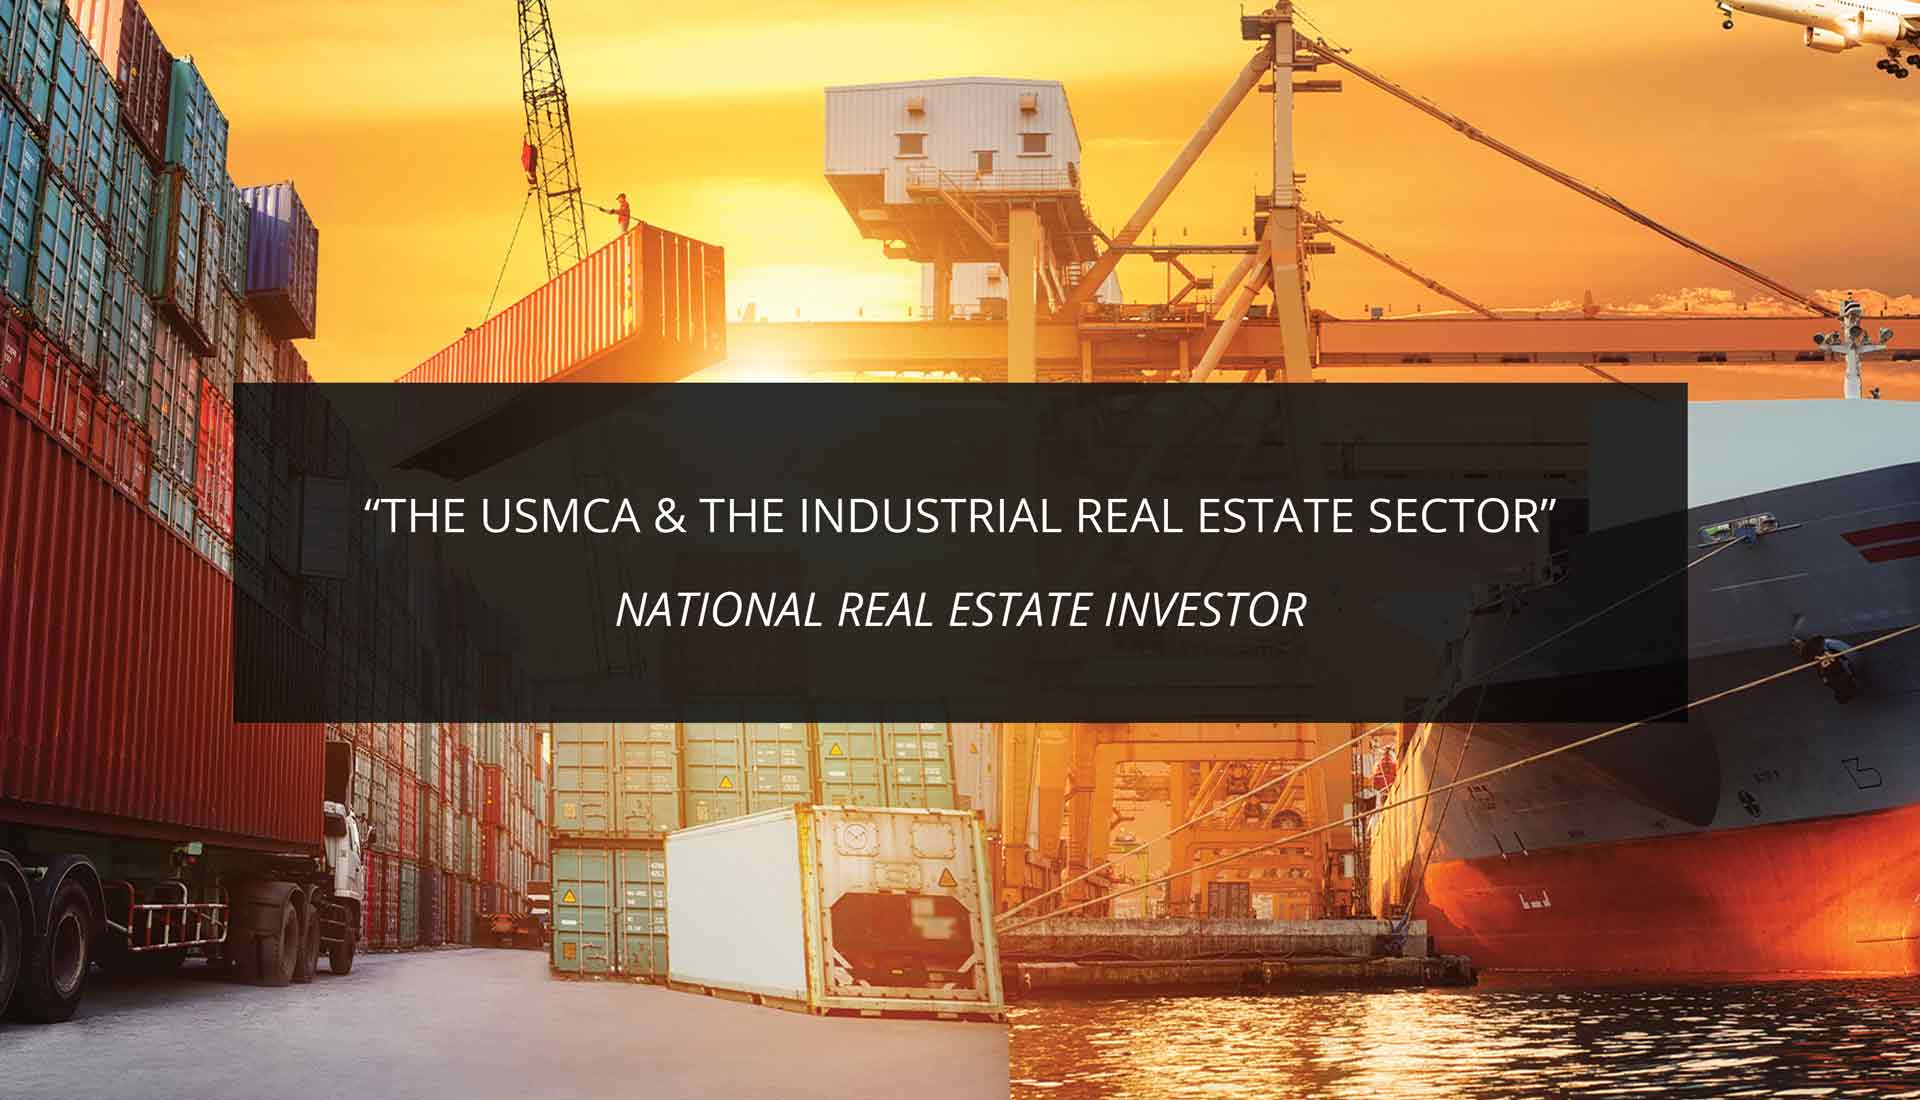 The USMCA & the Industrial Real Estate Sector